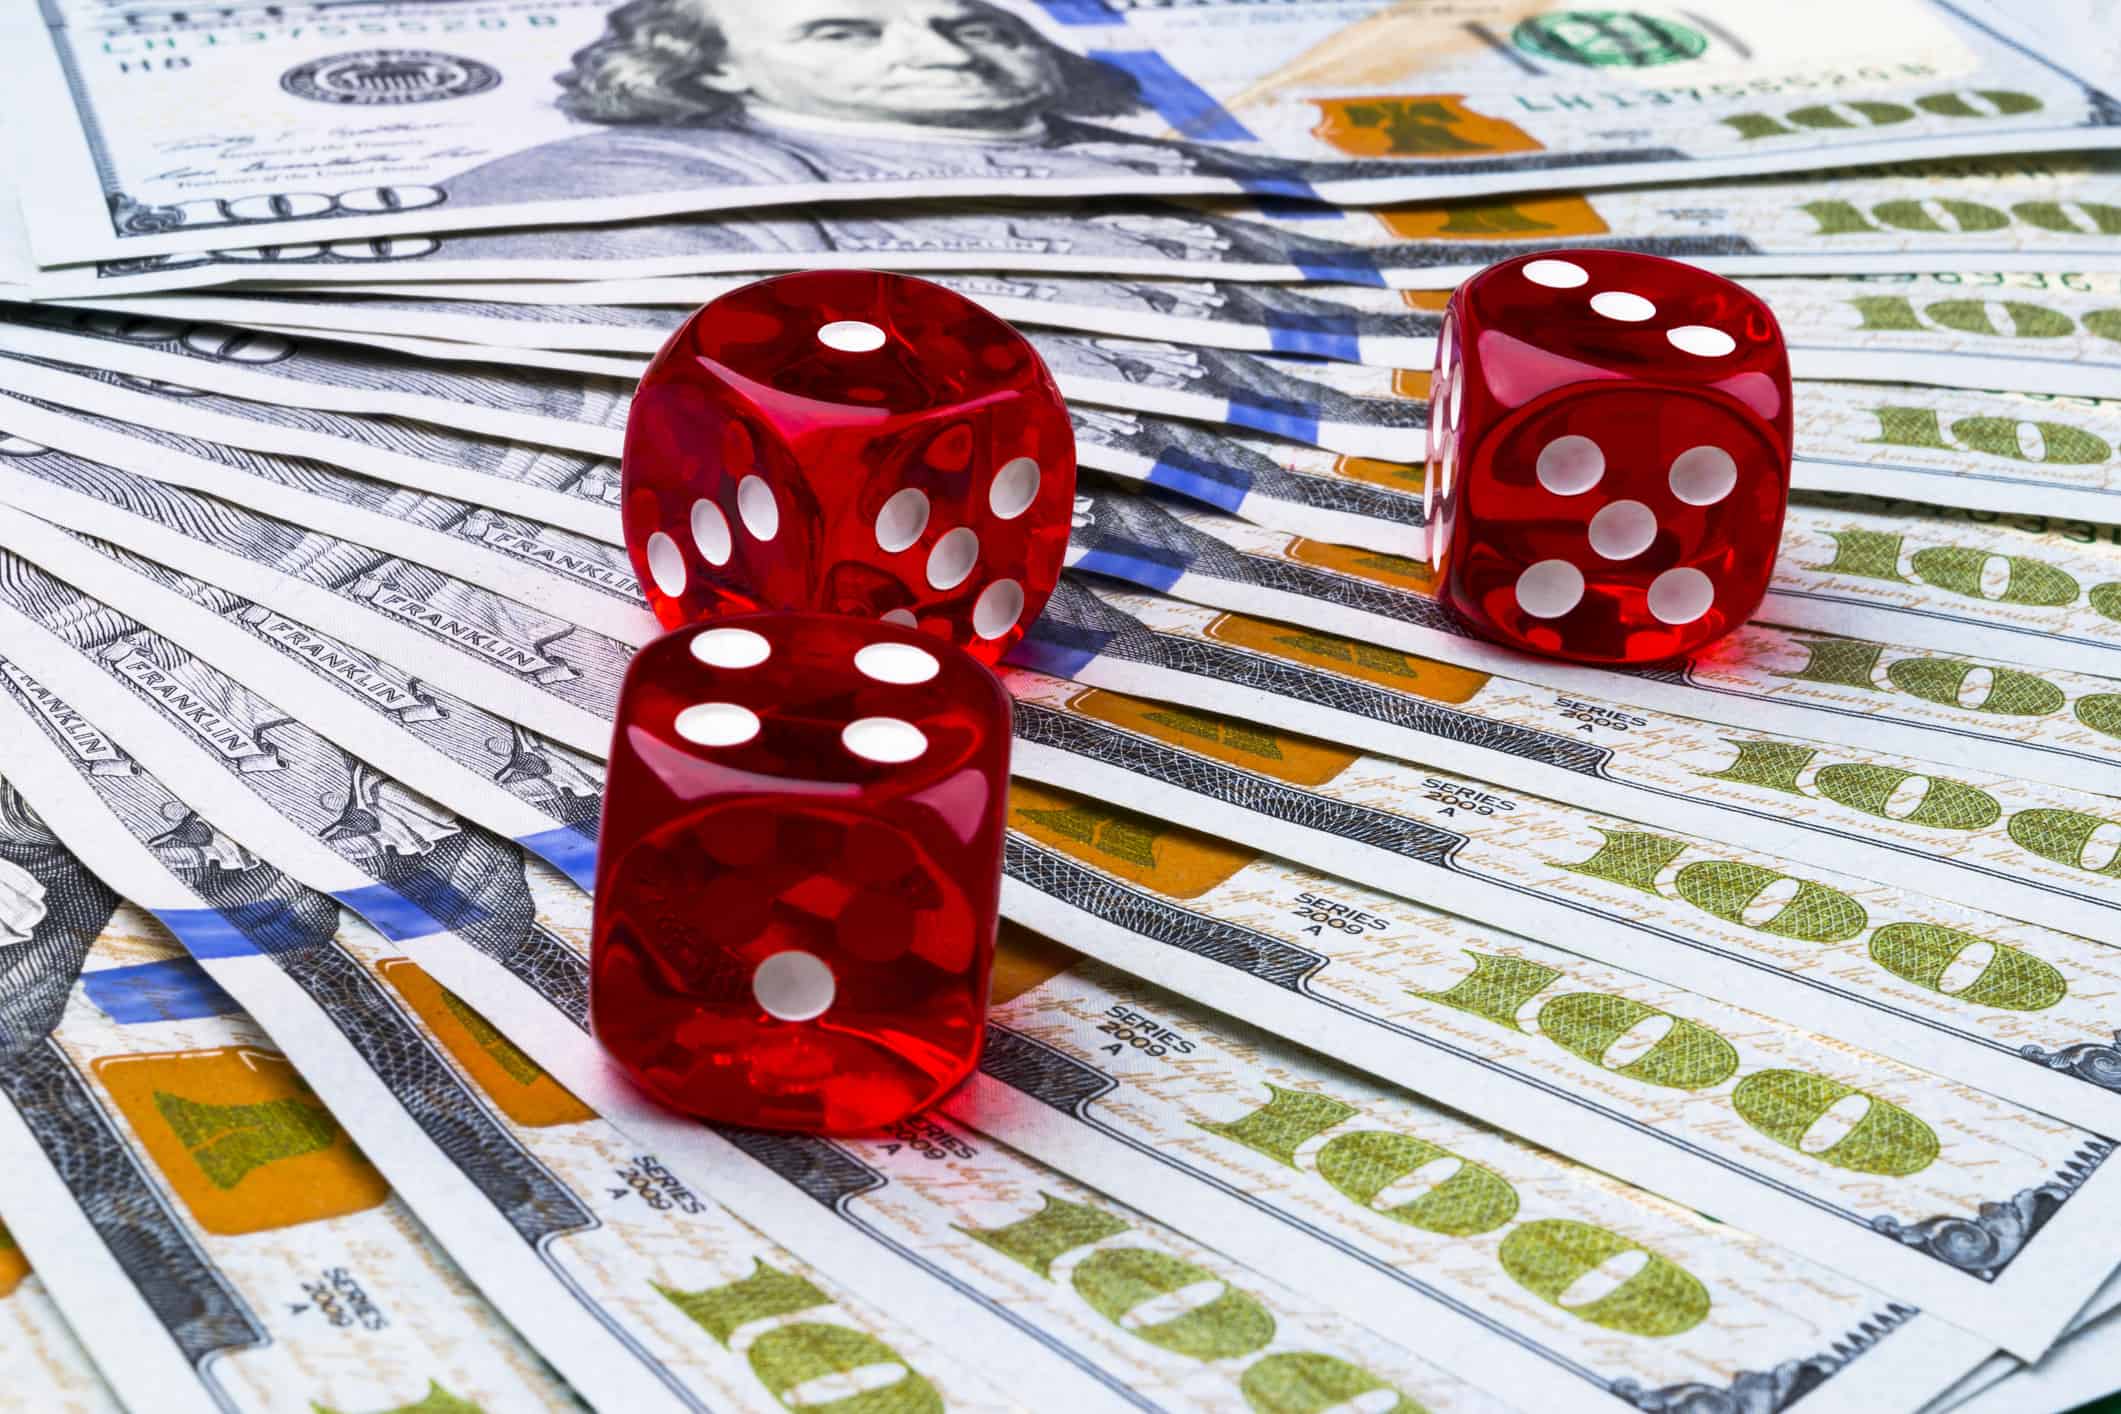 Poker dice rolls on a dollar bills, Money. Poker table at the casino. Poker game concept. Playing a game with dice. Casino dice rolls. Concept for business risk. chance good luck